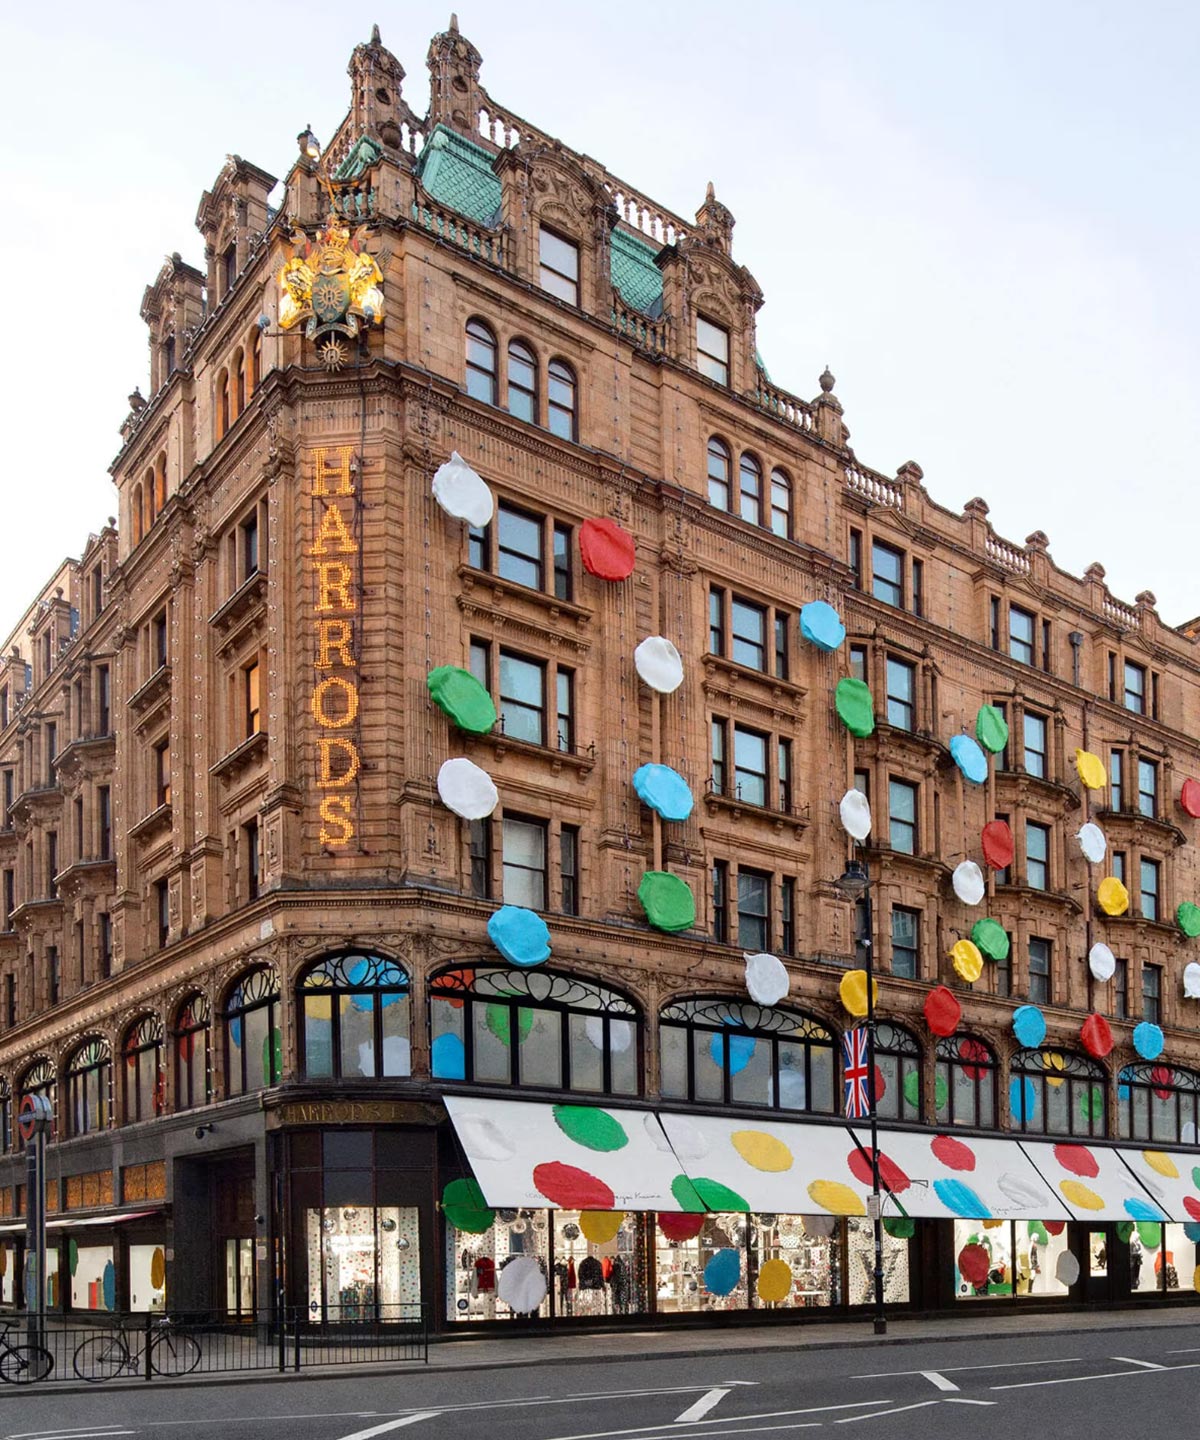 The immersive world of Louis Vuitton and Yayoi Kusama at London's Harrods until 12th February